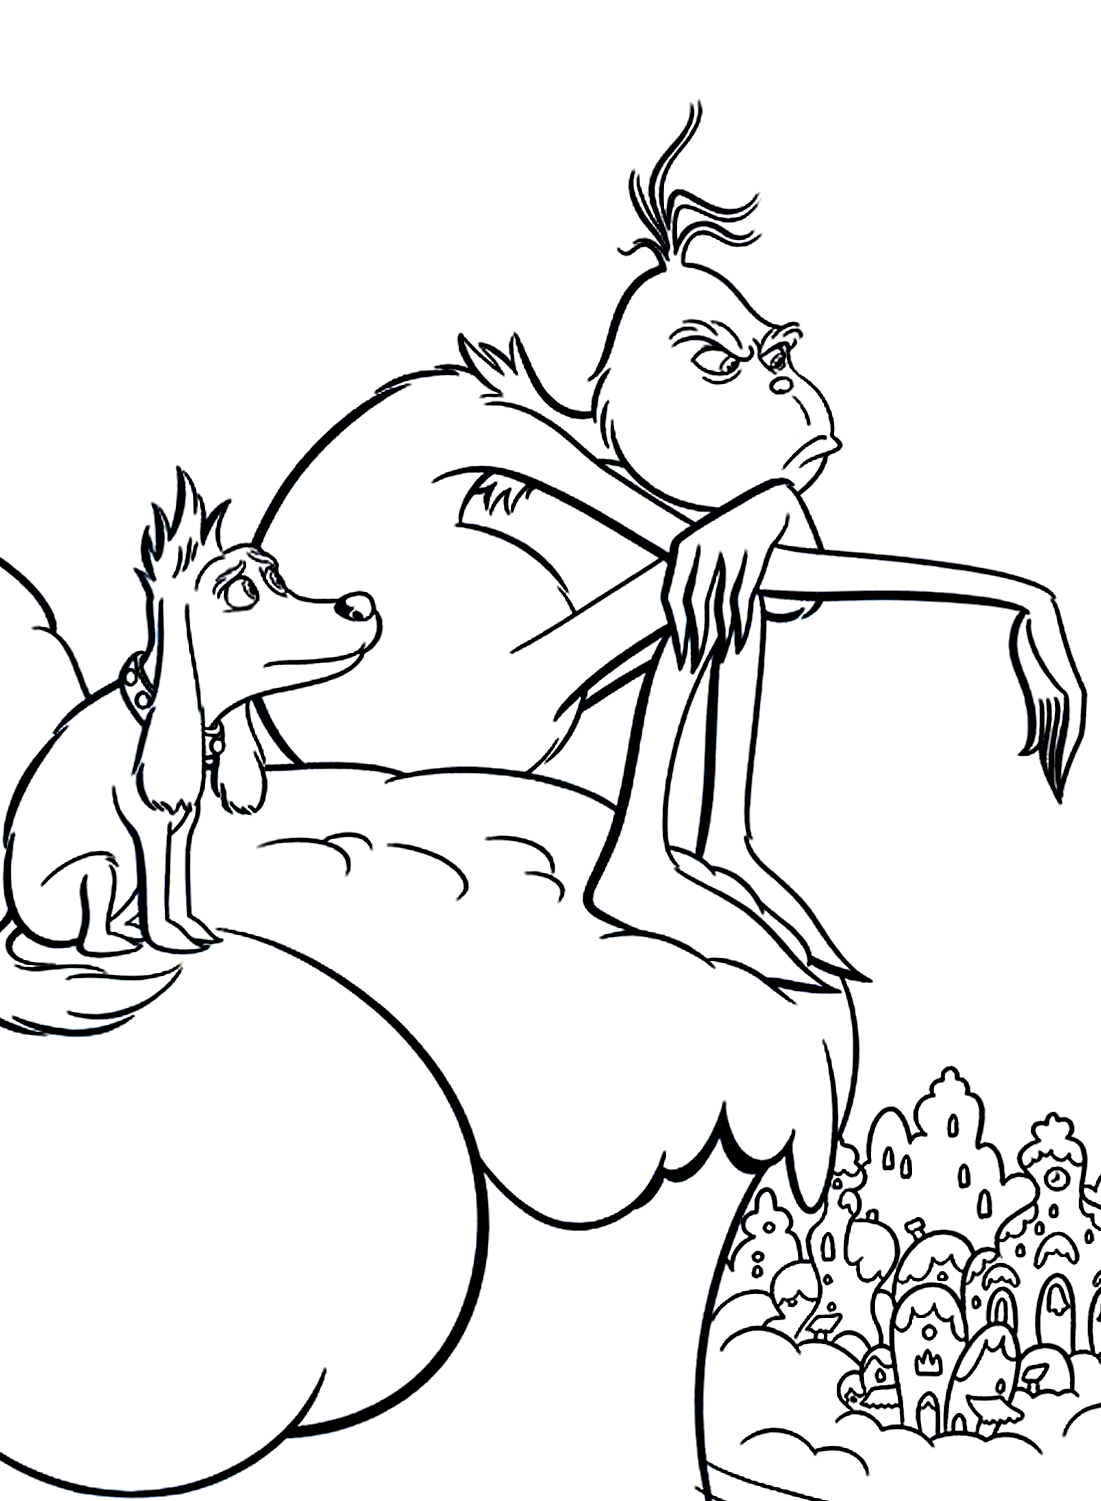 Coloring Page of Grinch is Sad